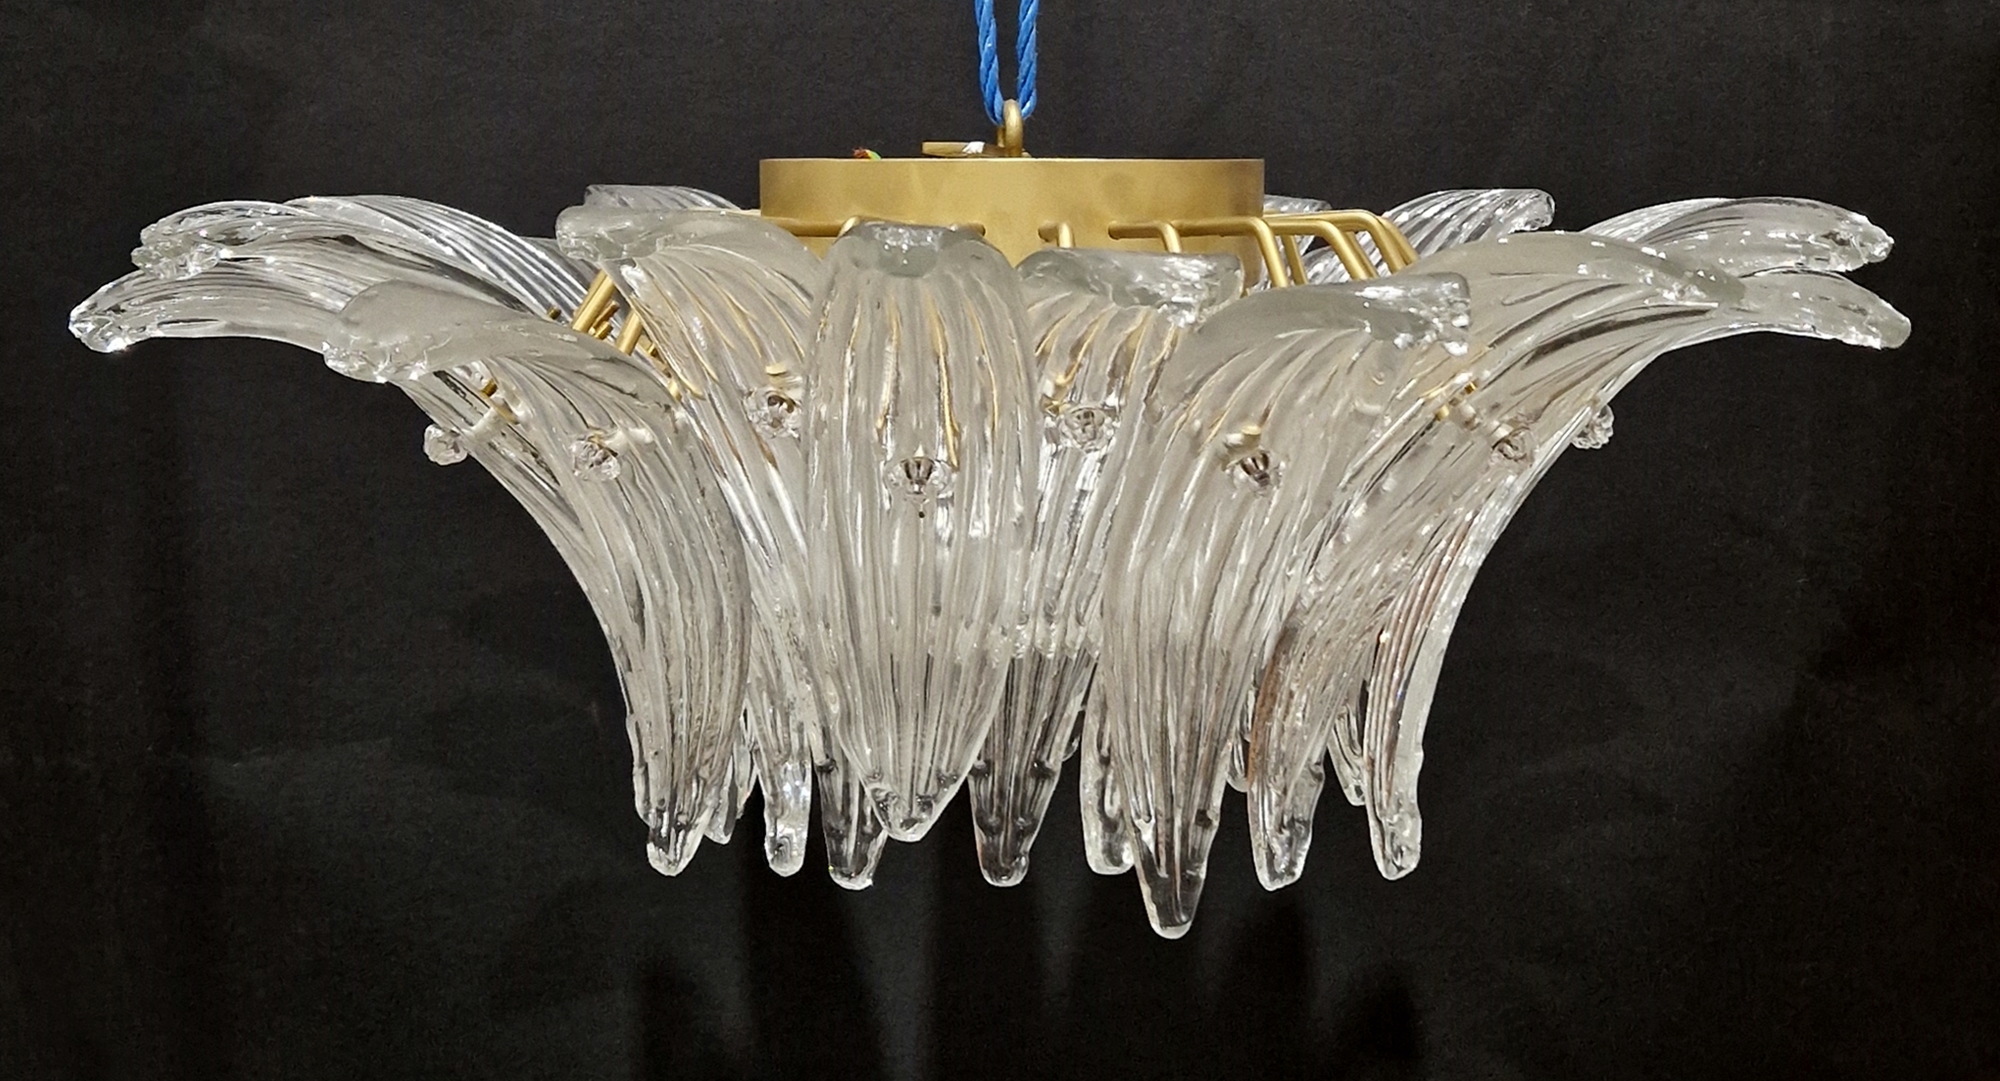 Barovier & Toso Murano glass 'Palmette' suspension lamp/electrolier, 5310 series, in the form of - Image 2 of 2